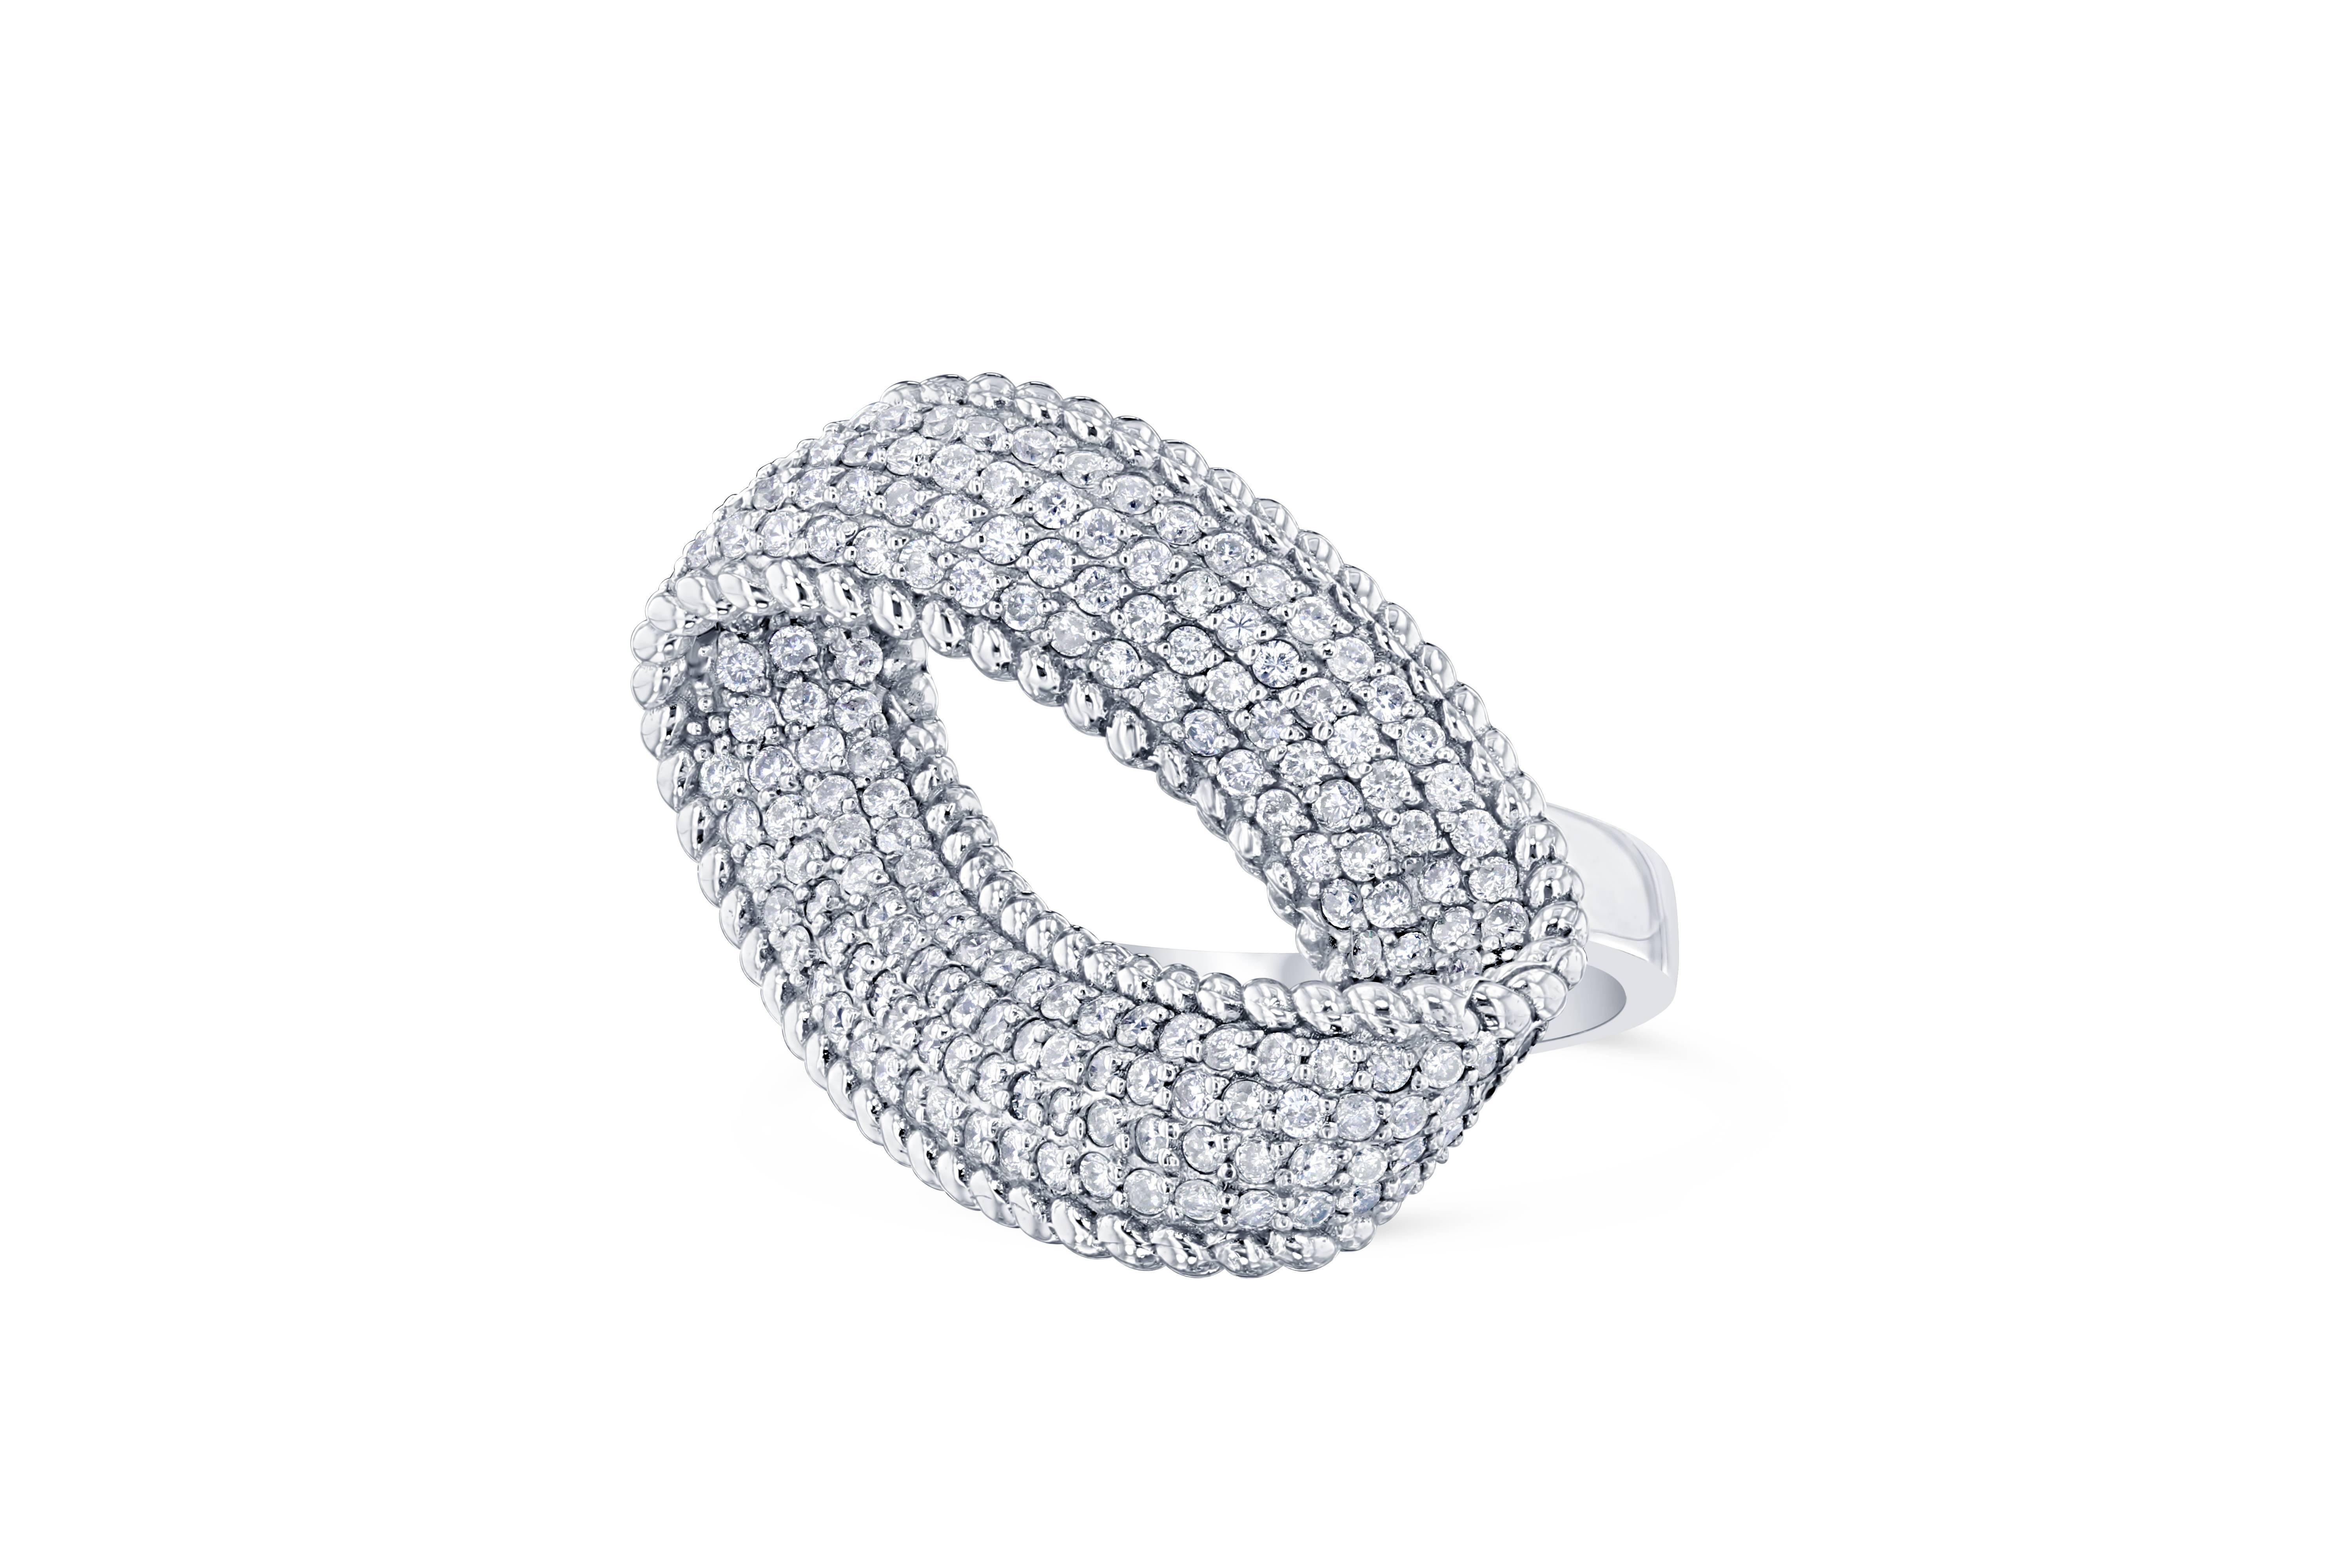 Inspired from the infinity loop design, this ring is a must-have!  There are 186 Round Cut Diamonds that weigh 1.16 carats. This ring is casted in 14K White Gold and weighs approximately 8.3 grams.  The ring is a size 6 and can be re-sized at no